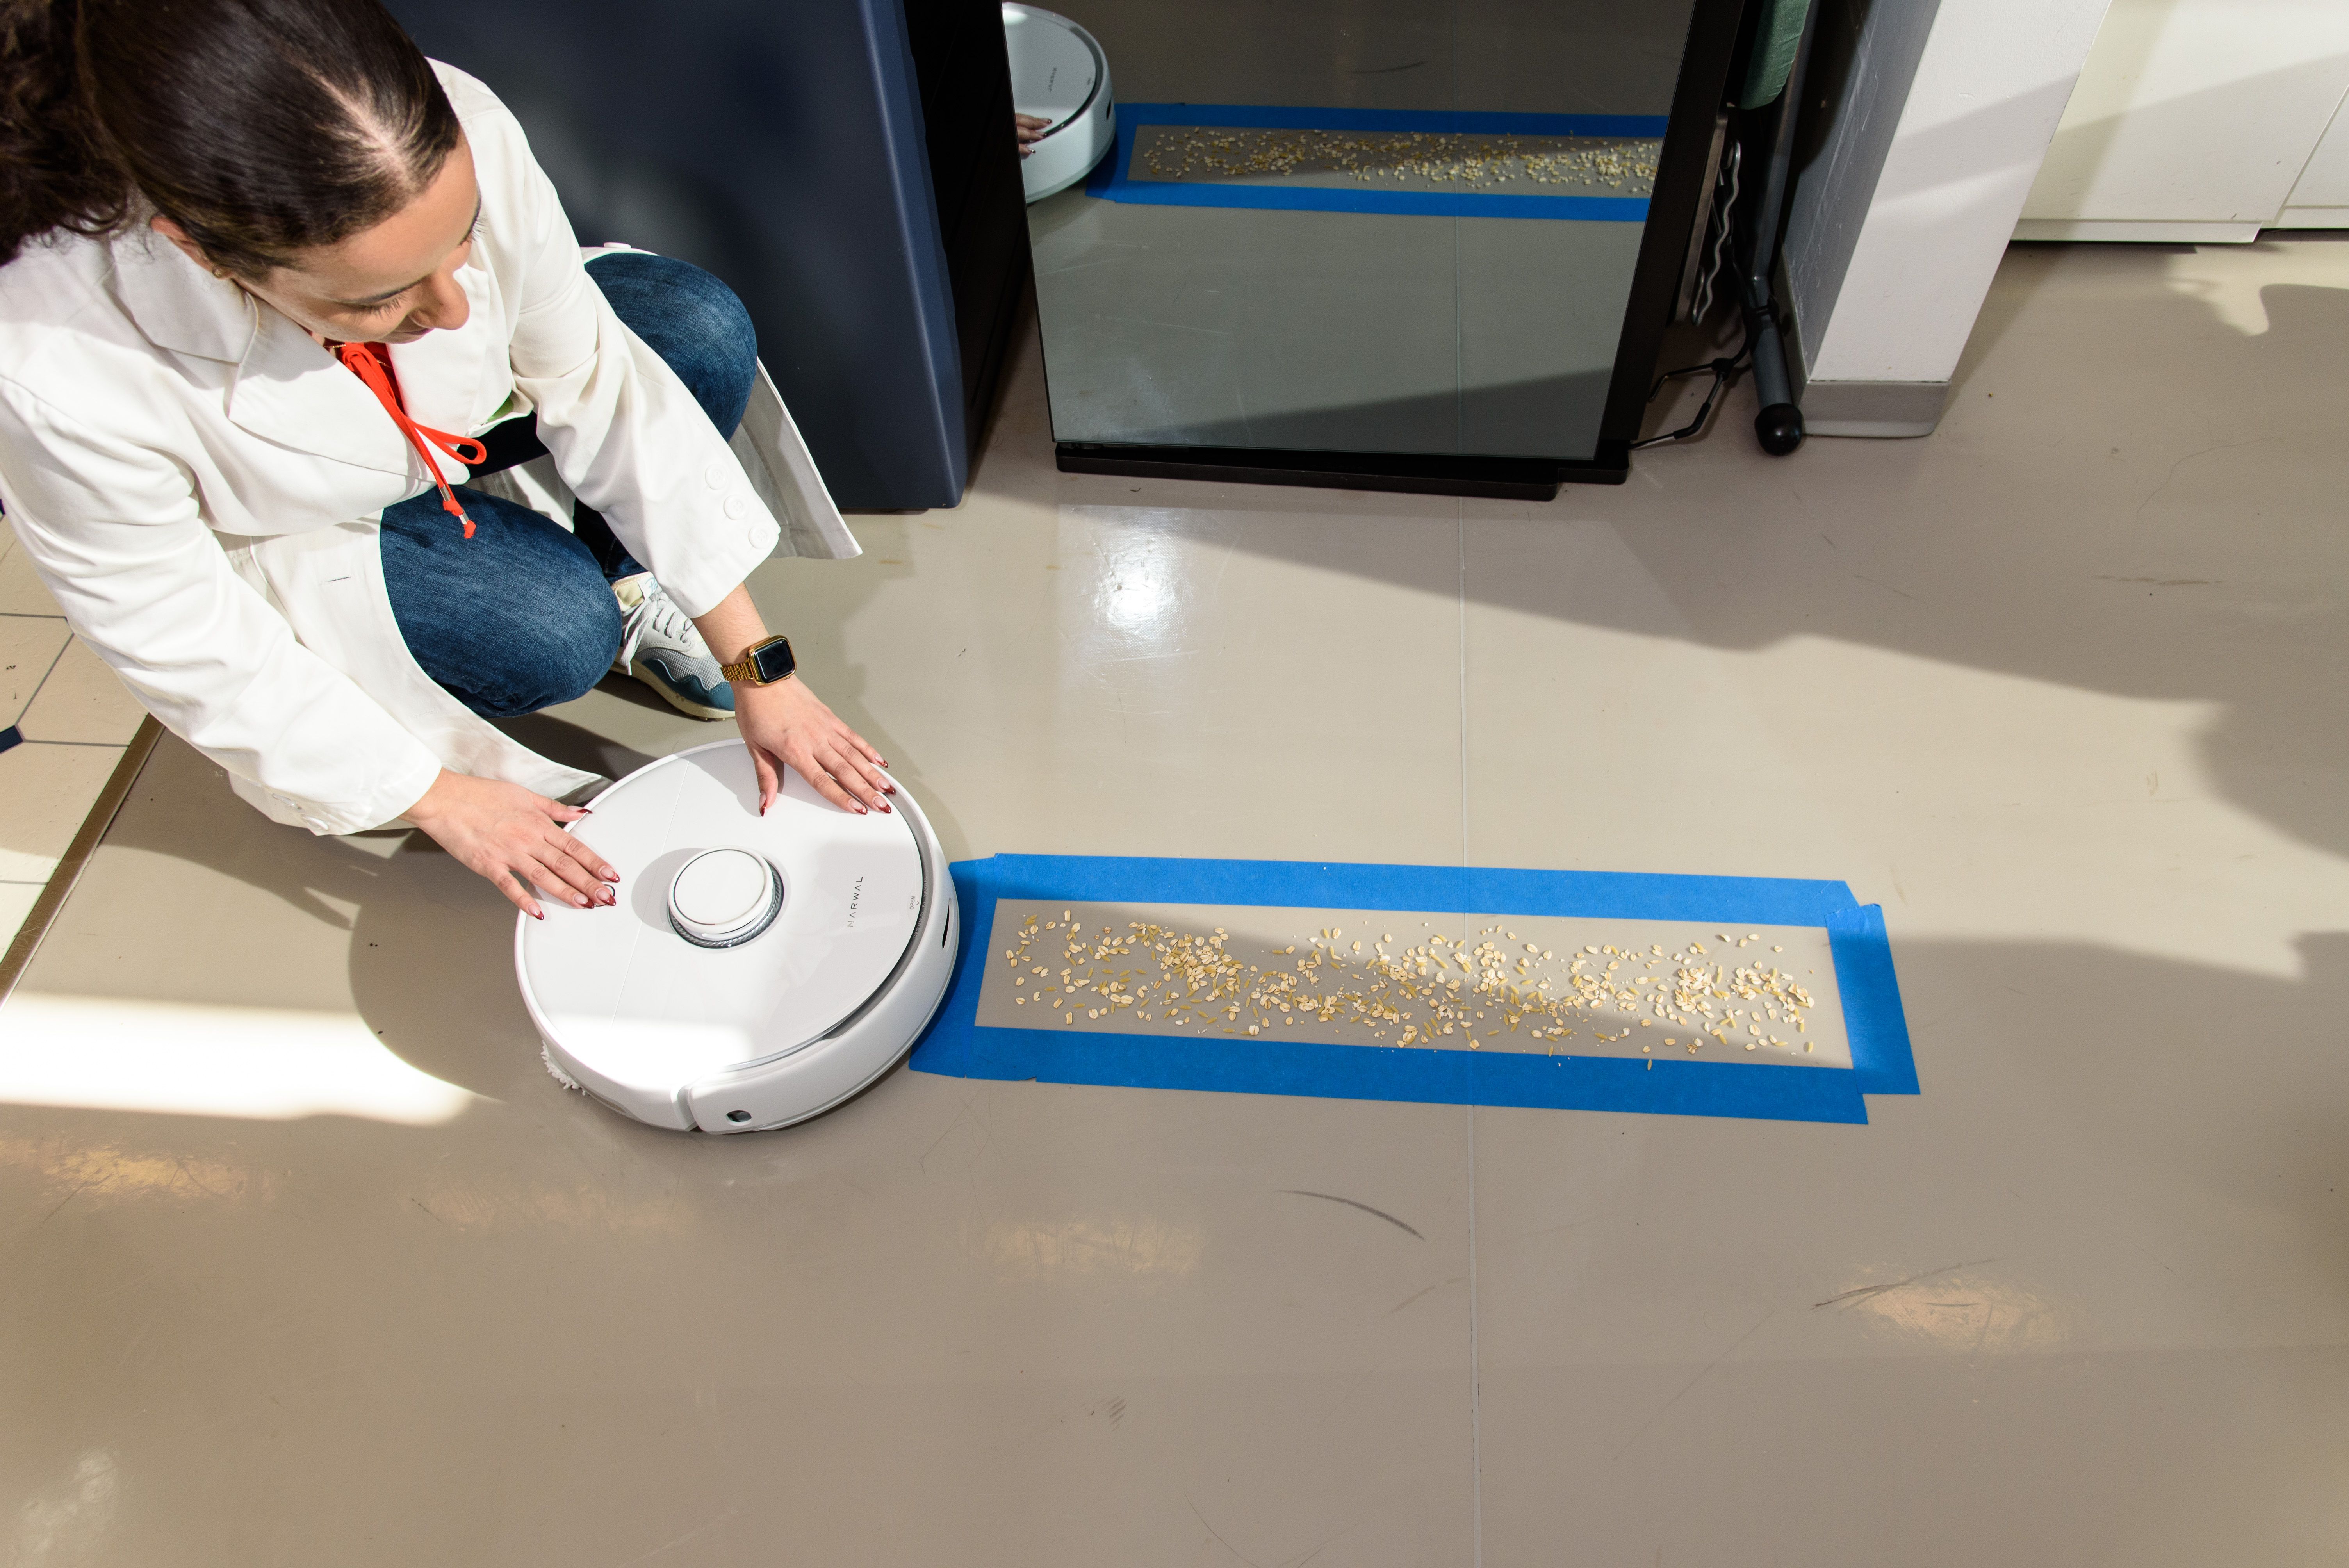 Conga vs Roborock: Is the most expensive robot vacuum necessarily better?, Science